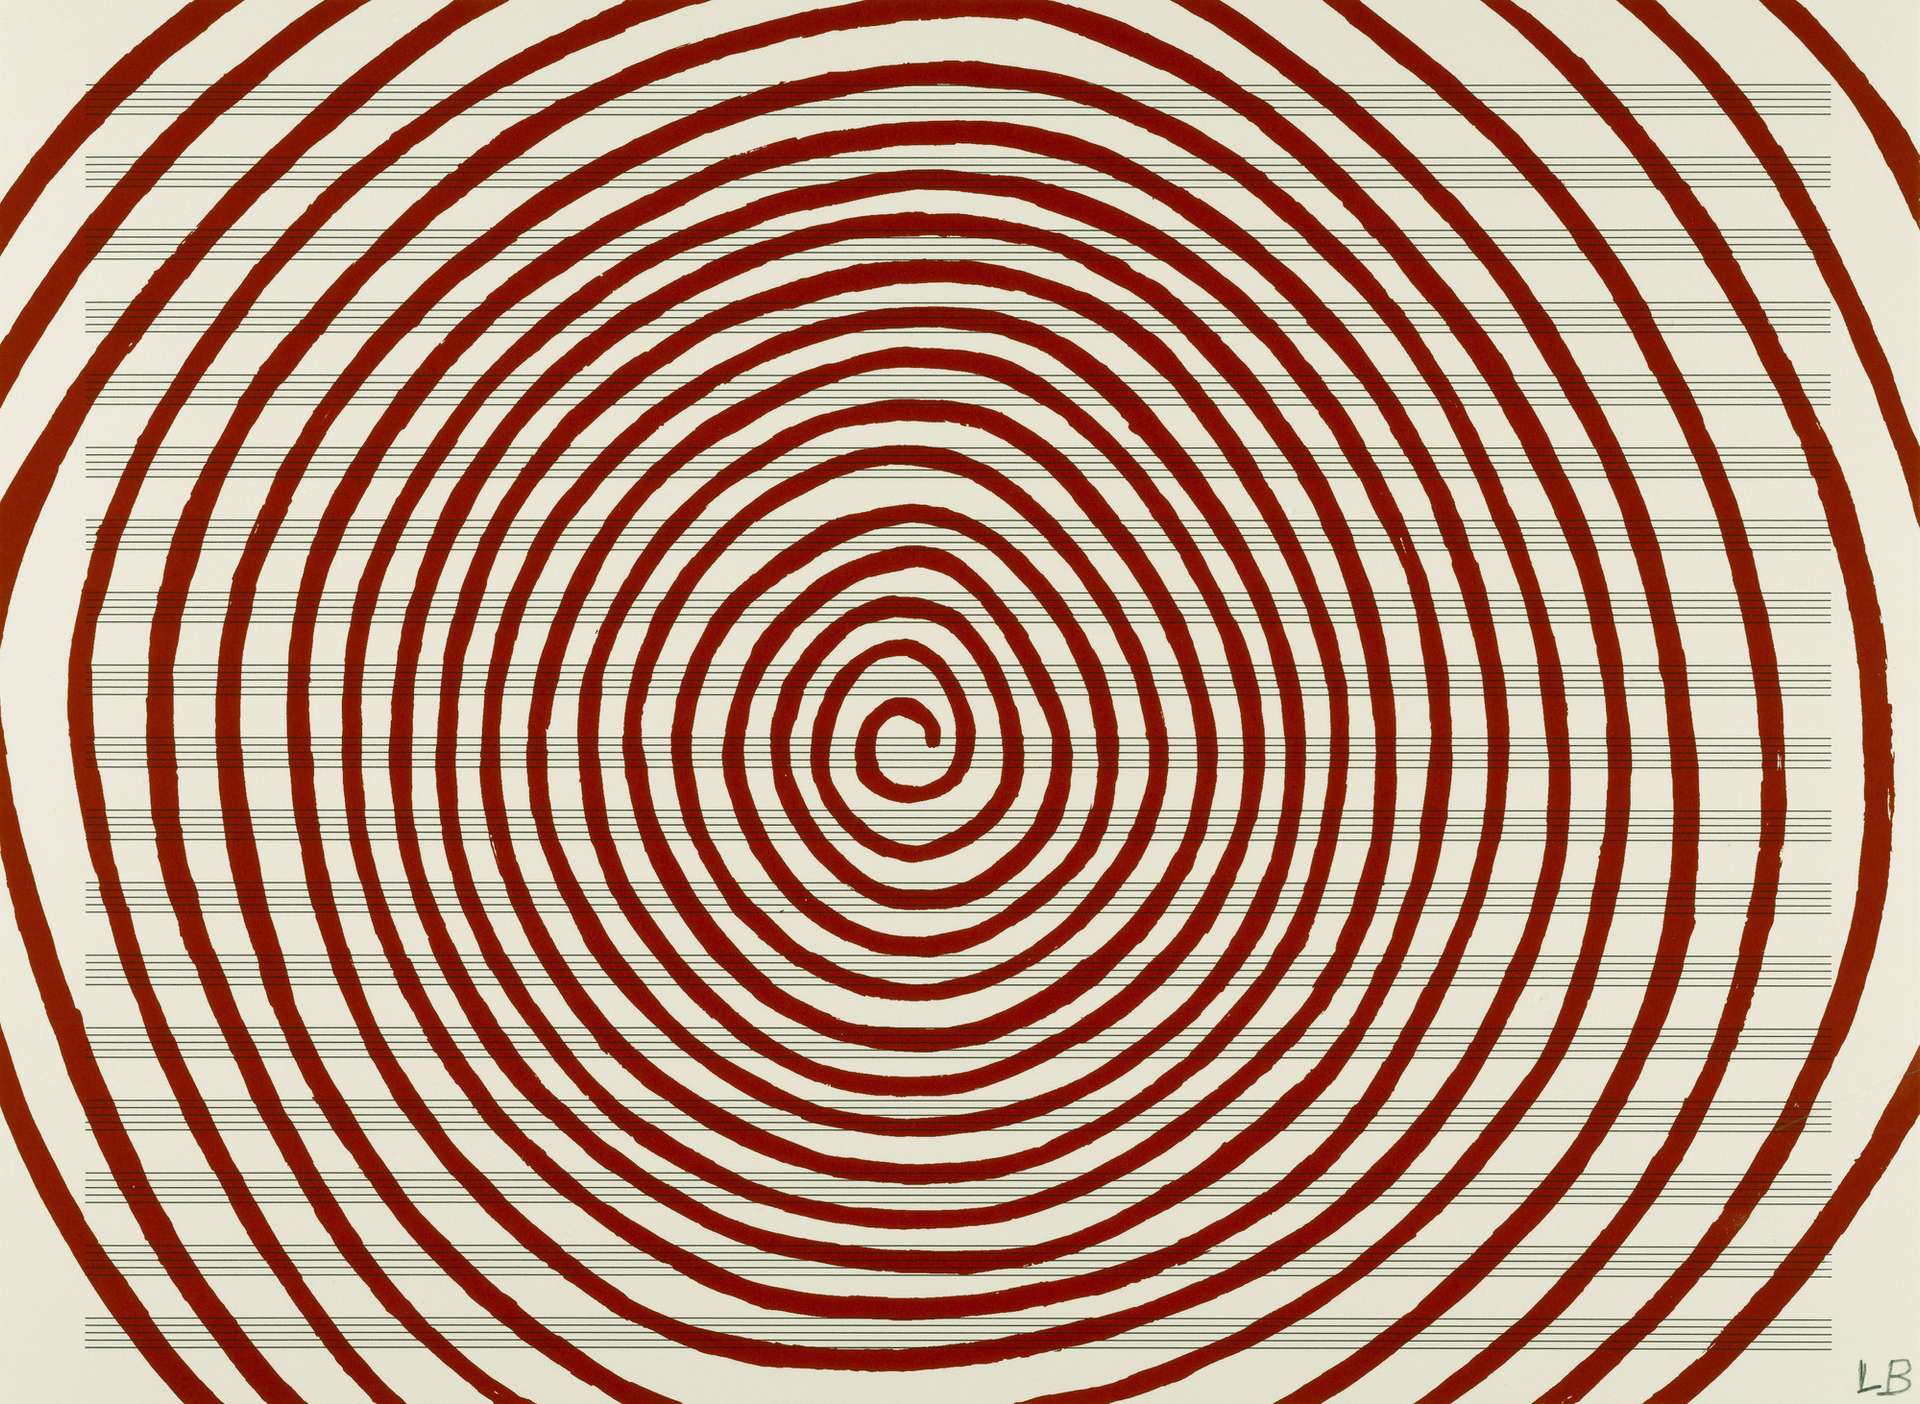 Louise Bourgeois’ Untitled #11. A screenprint of a continuous red spiral against a sheet of horizontal lines.